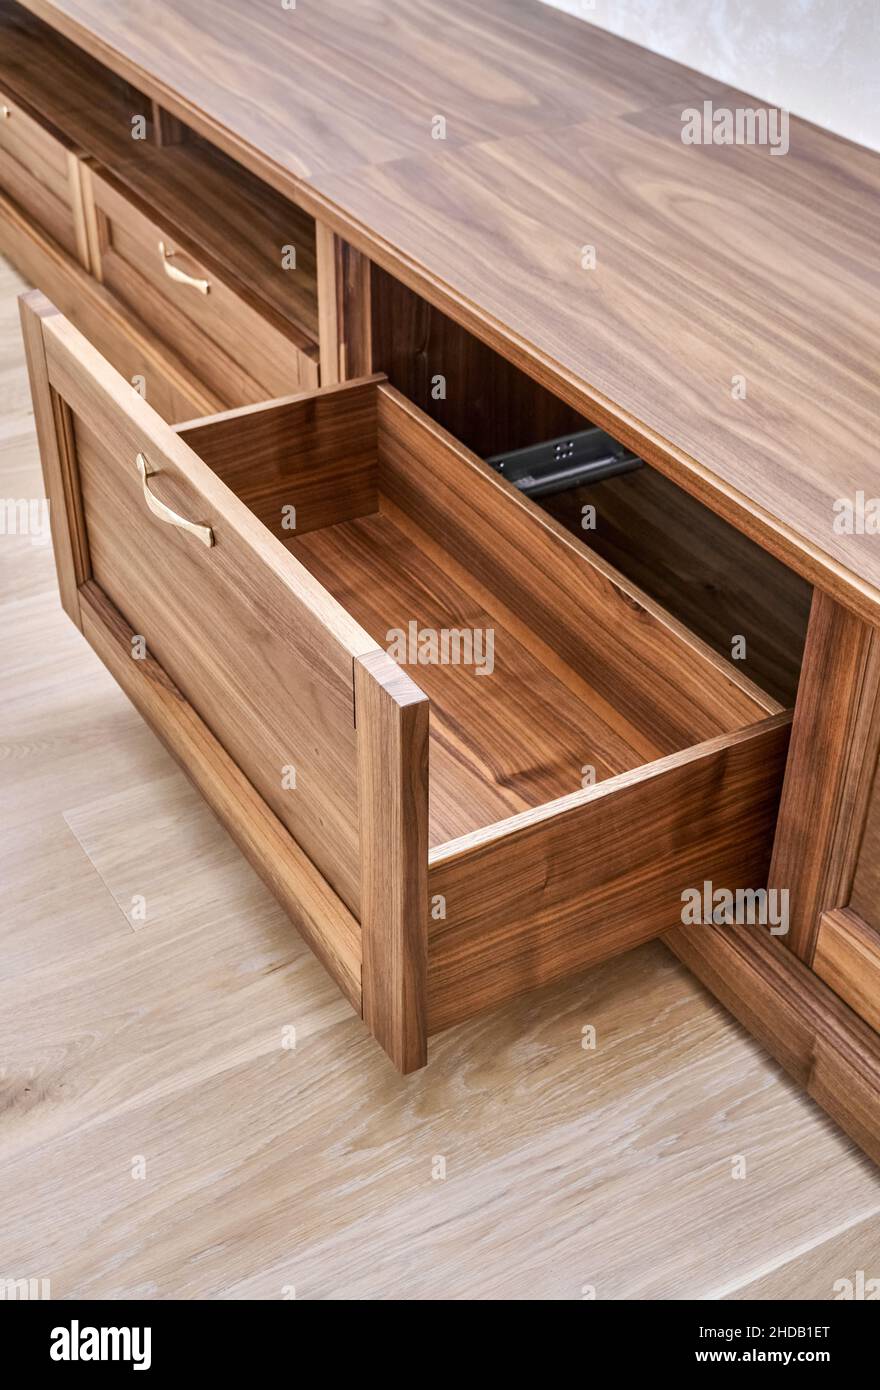 Elegant new TV cabinet made of veneer and solid walnut lumber with gold handles near wall in light room close upper view Stock Photo